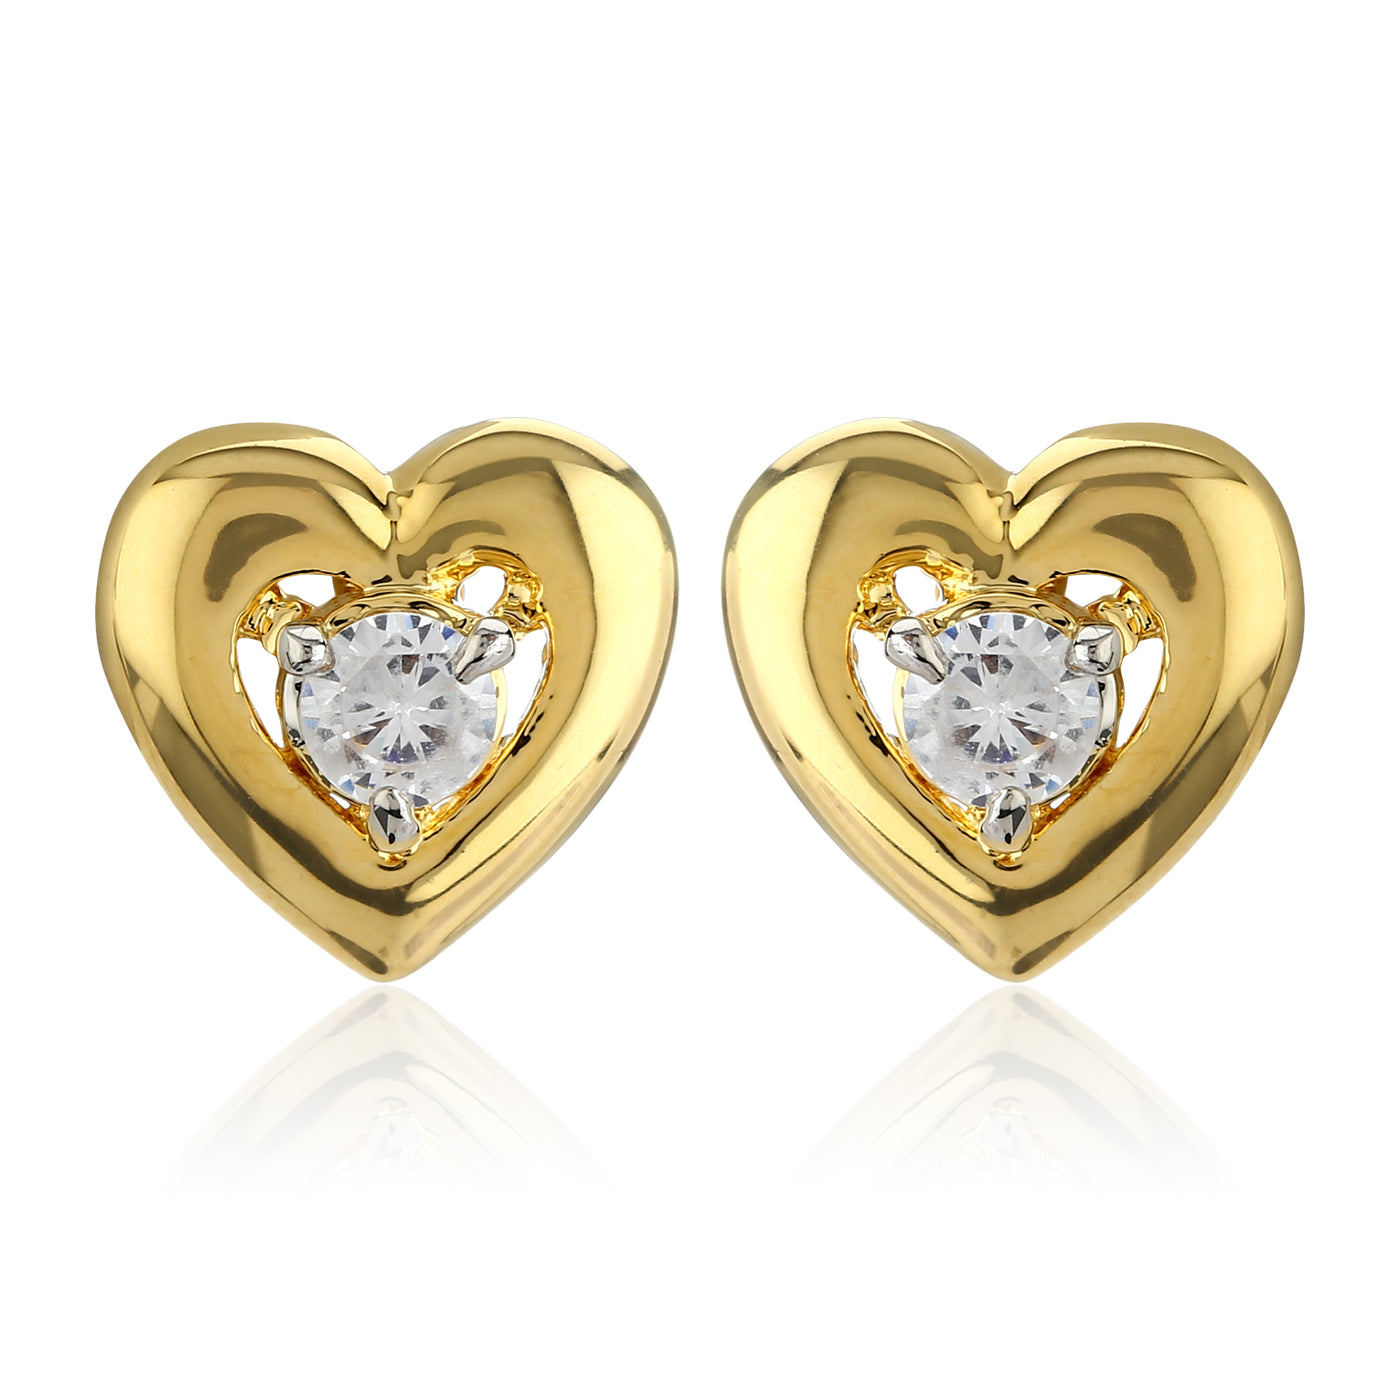 Heart Shaped Stud Earrings With Ad Stone